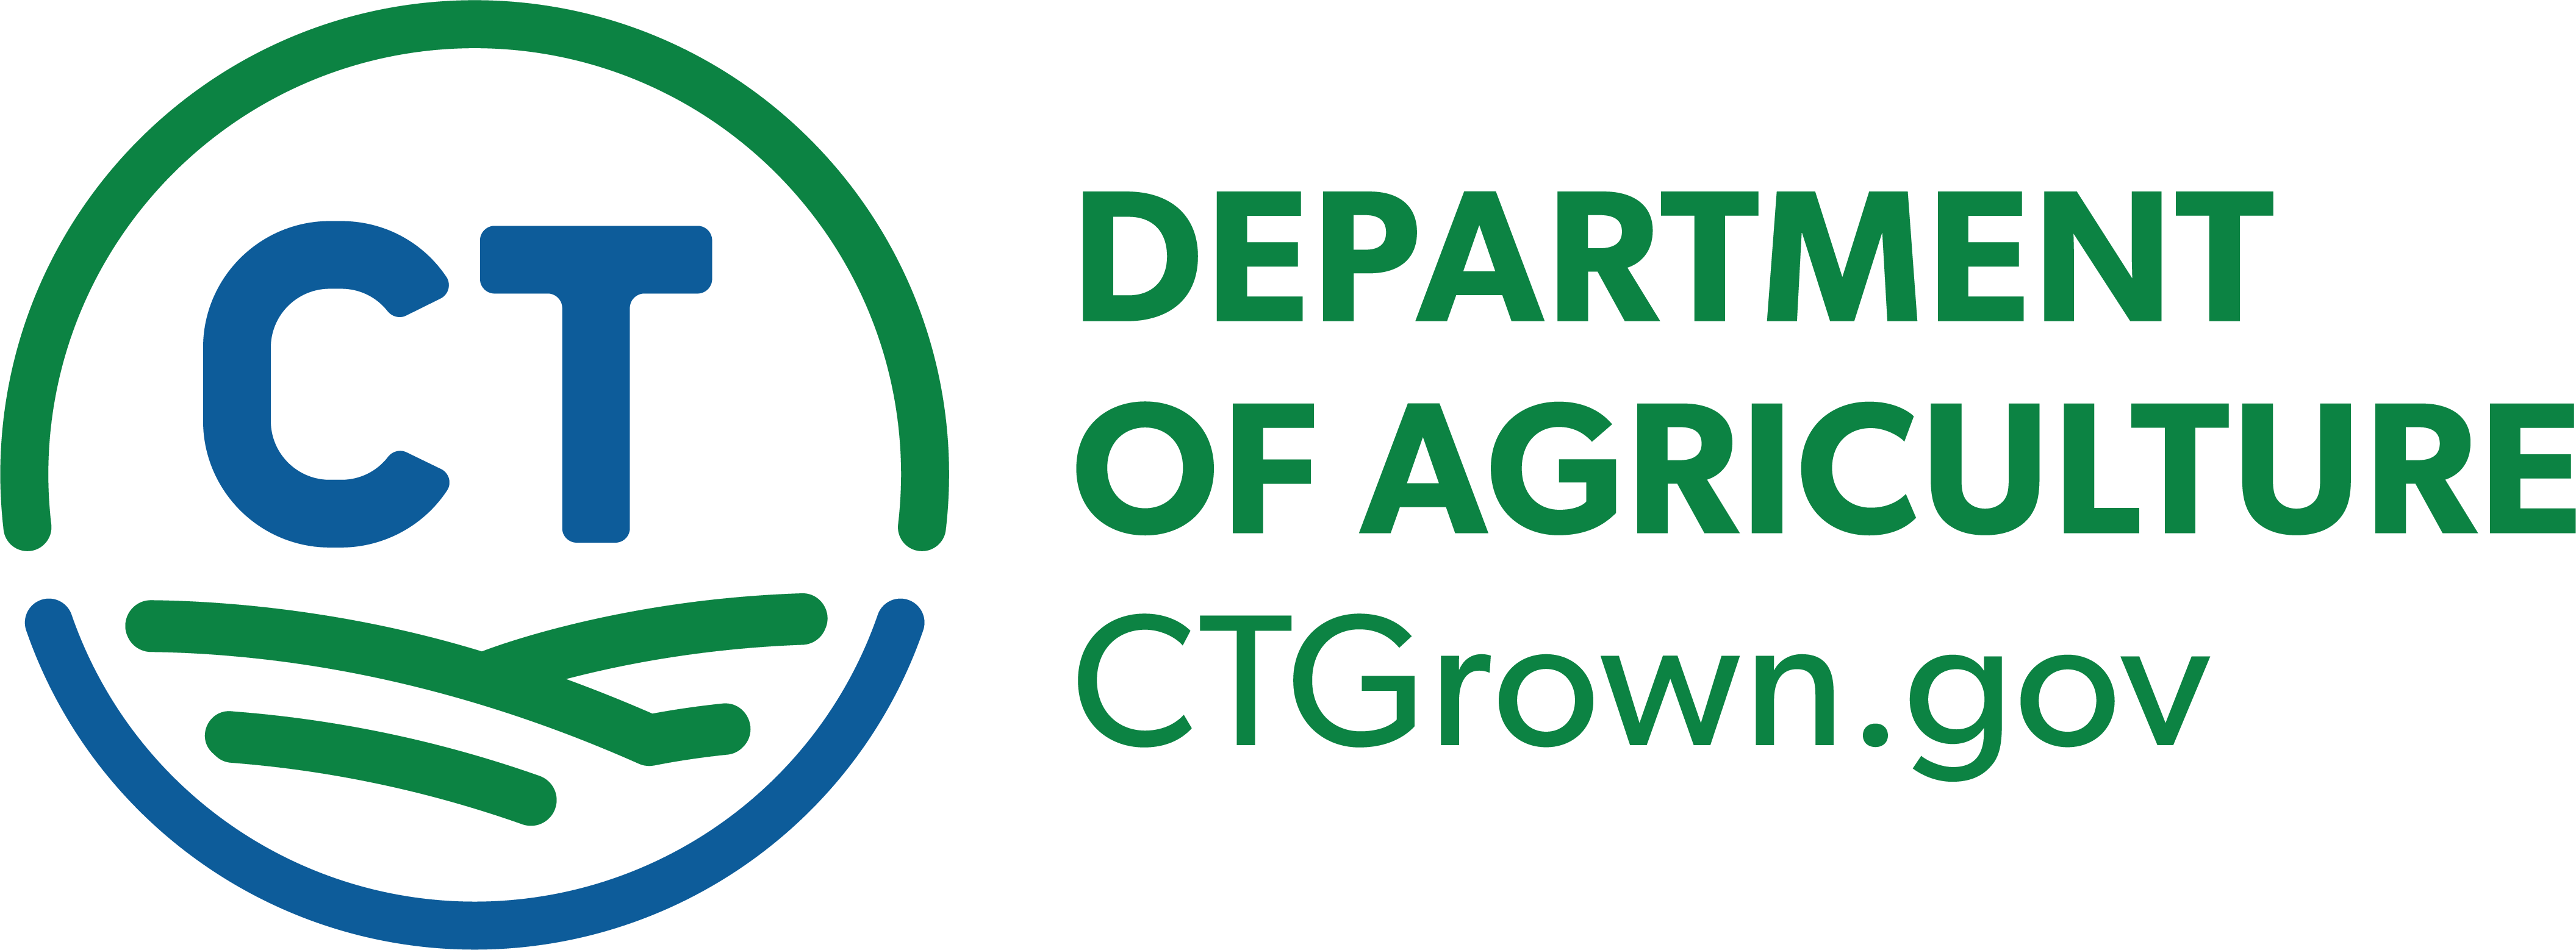 CT Department of Agriculture Logo and website 